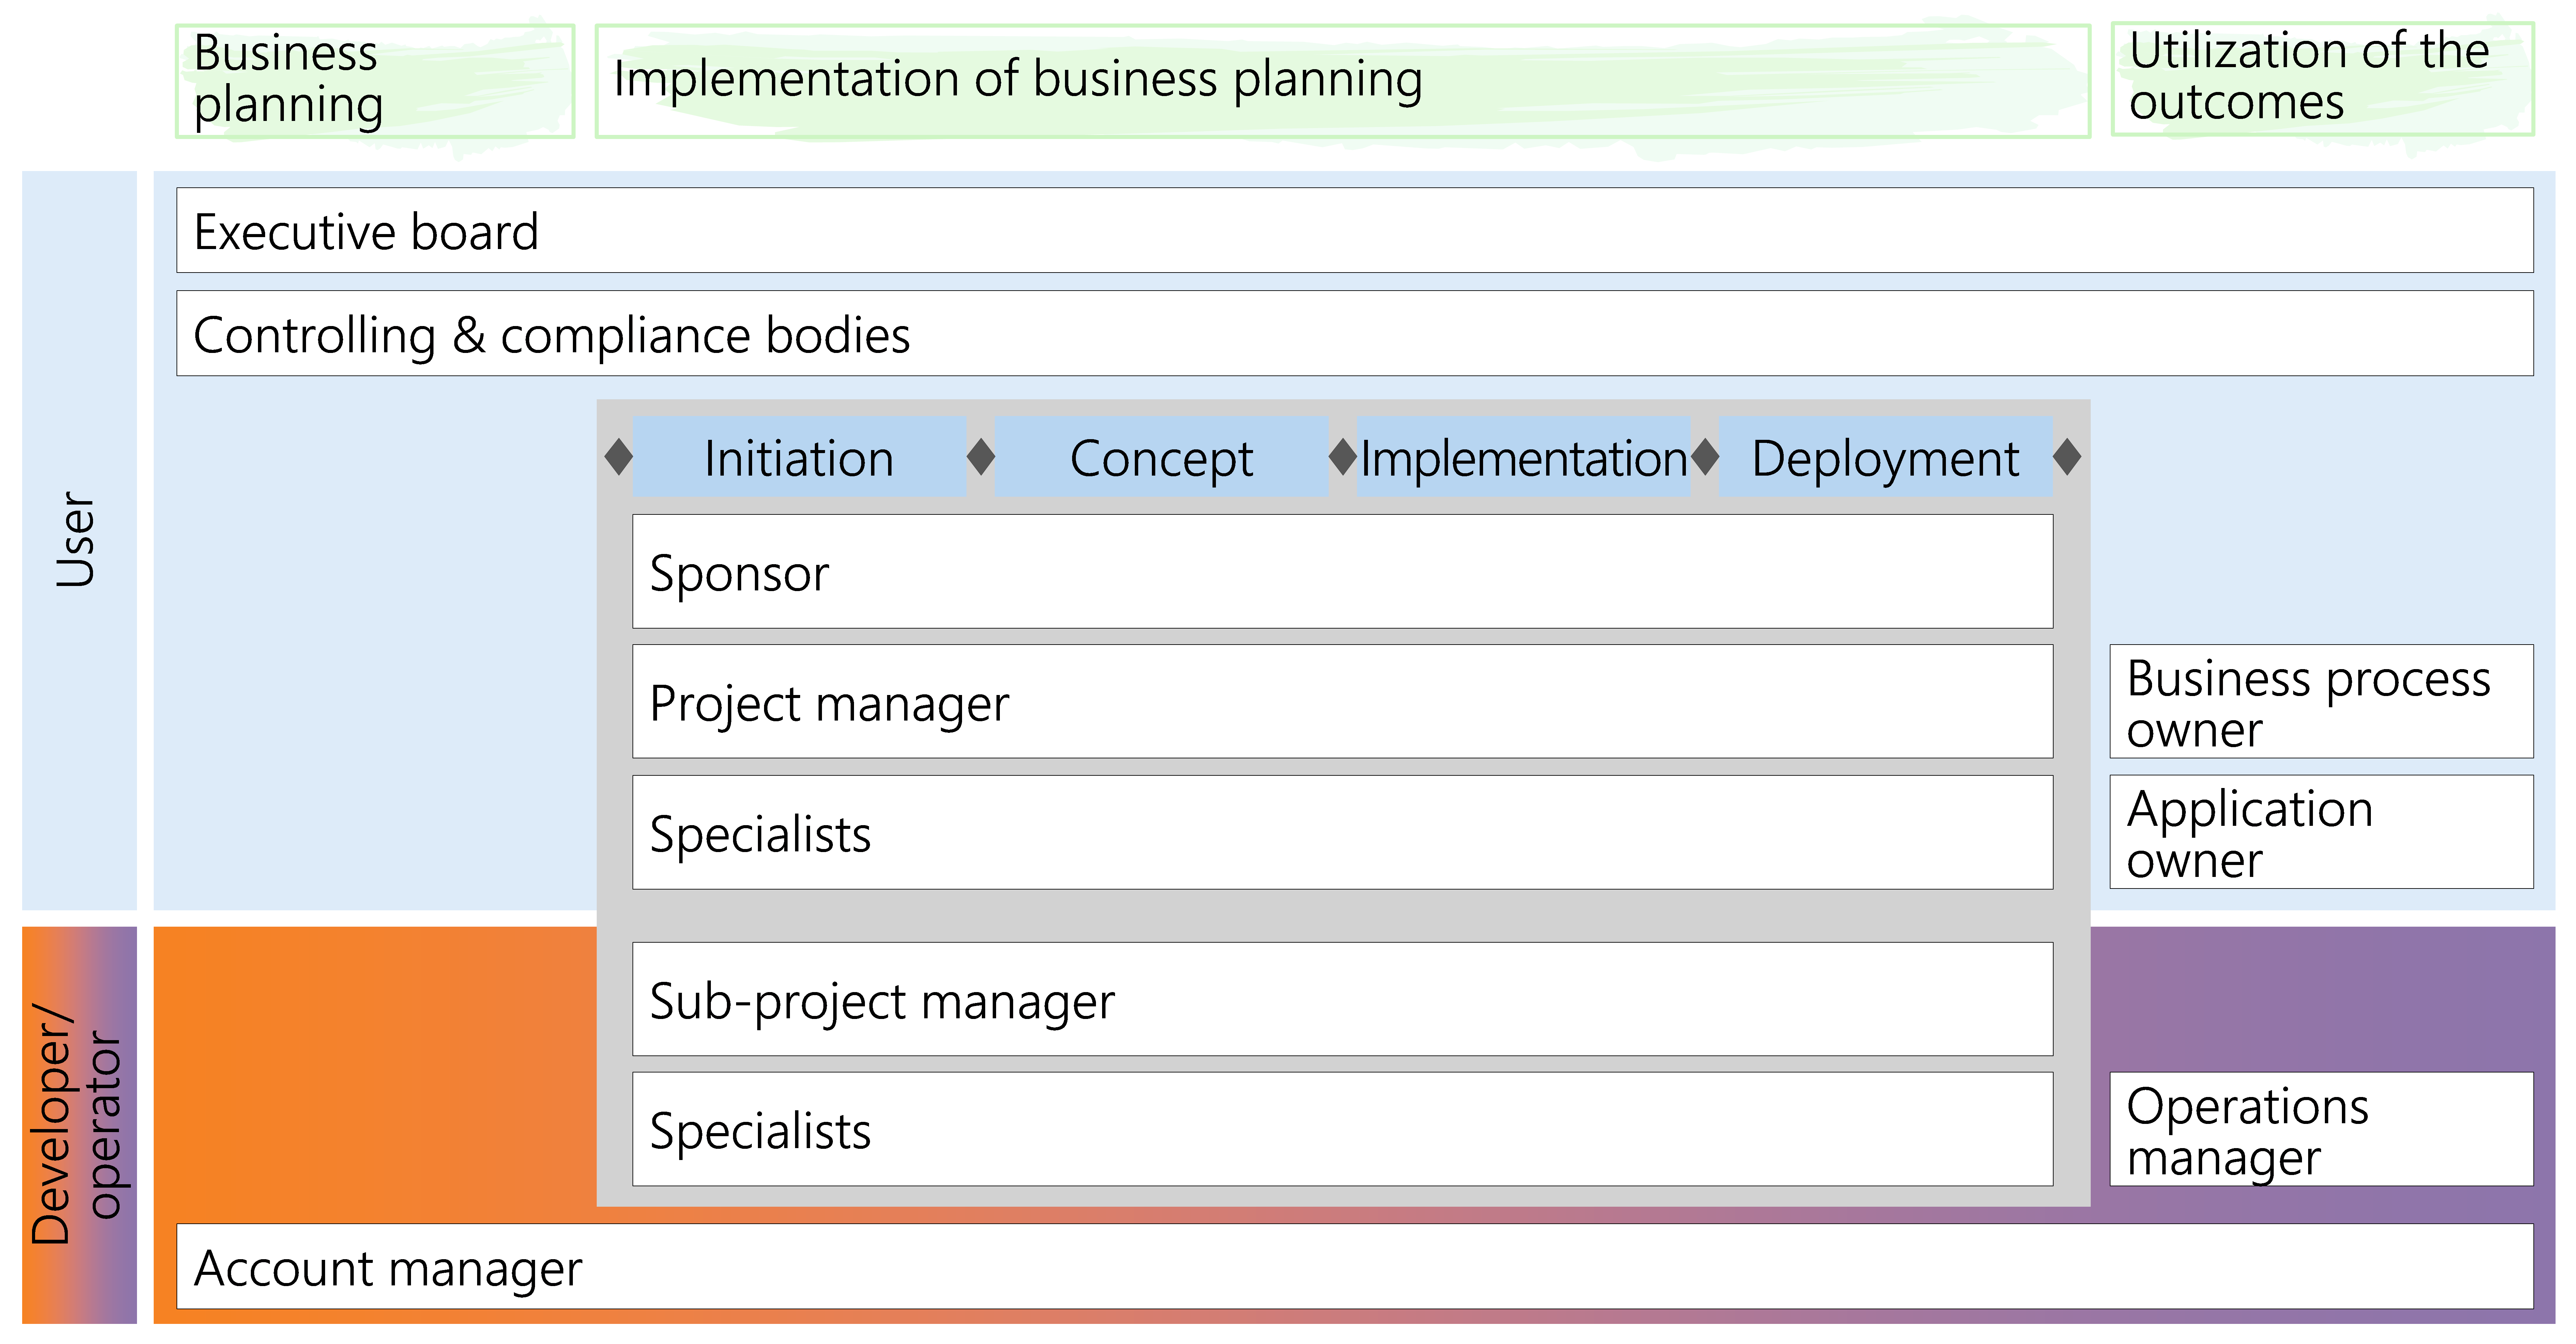 Figure 25: Business processes in the light of HERMES